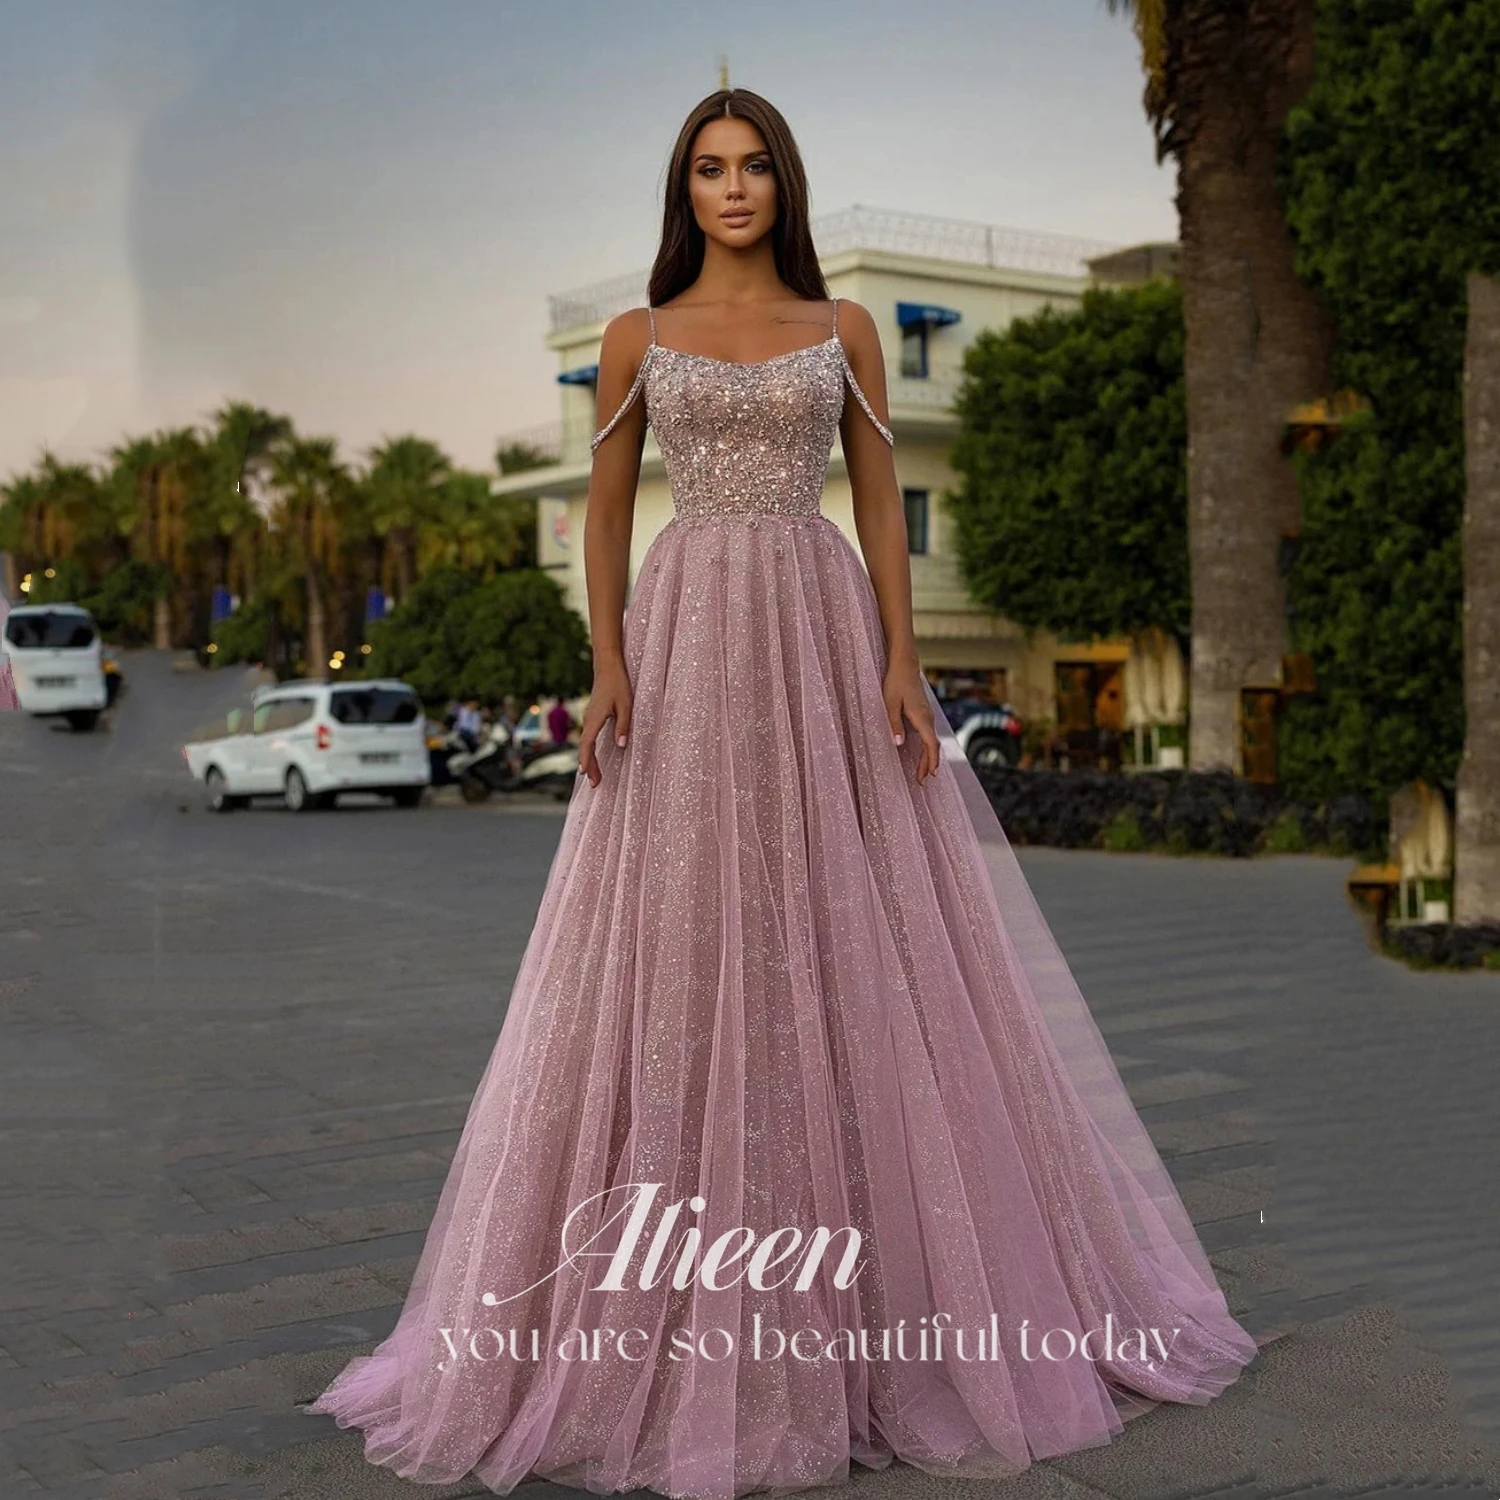 

Aileen Blush Pink Sequin Prom Dress Tulle Spaghetti Strap A Line Long Formal Evening Party Gowns For Women Floor Length Lace Up